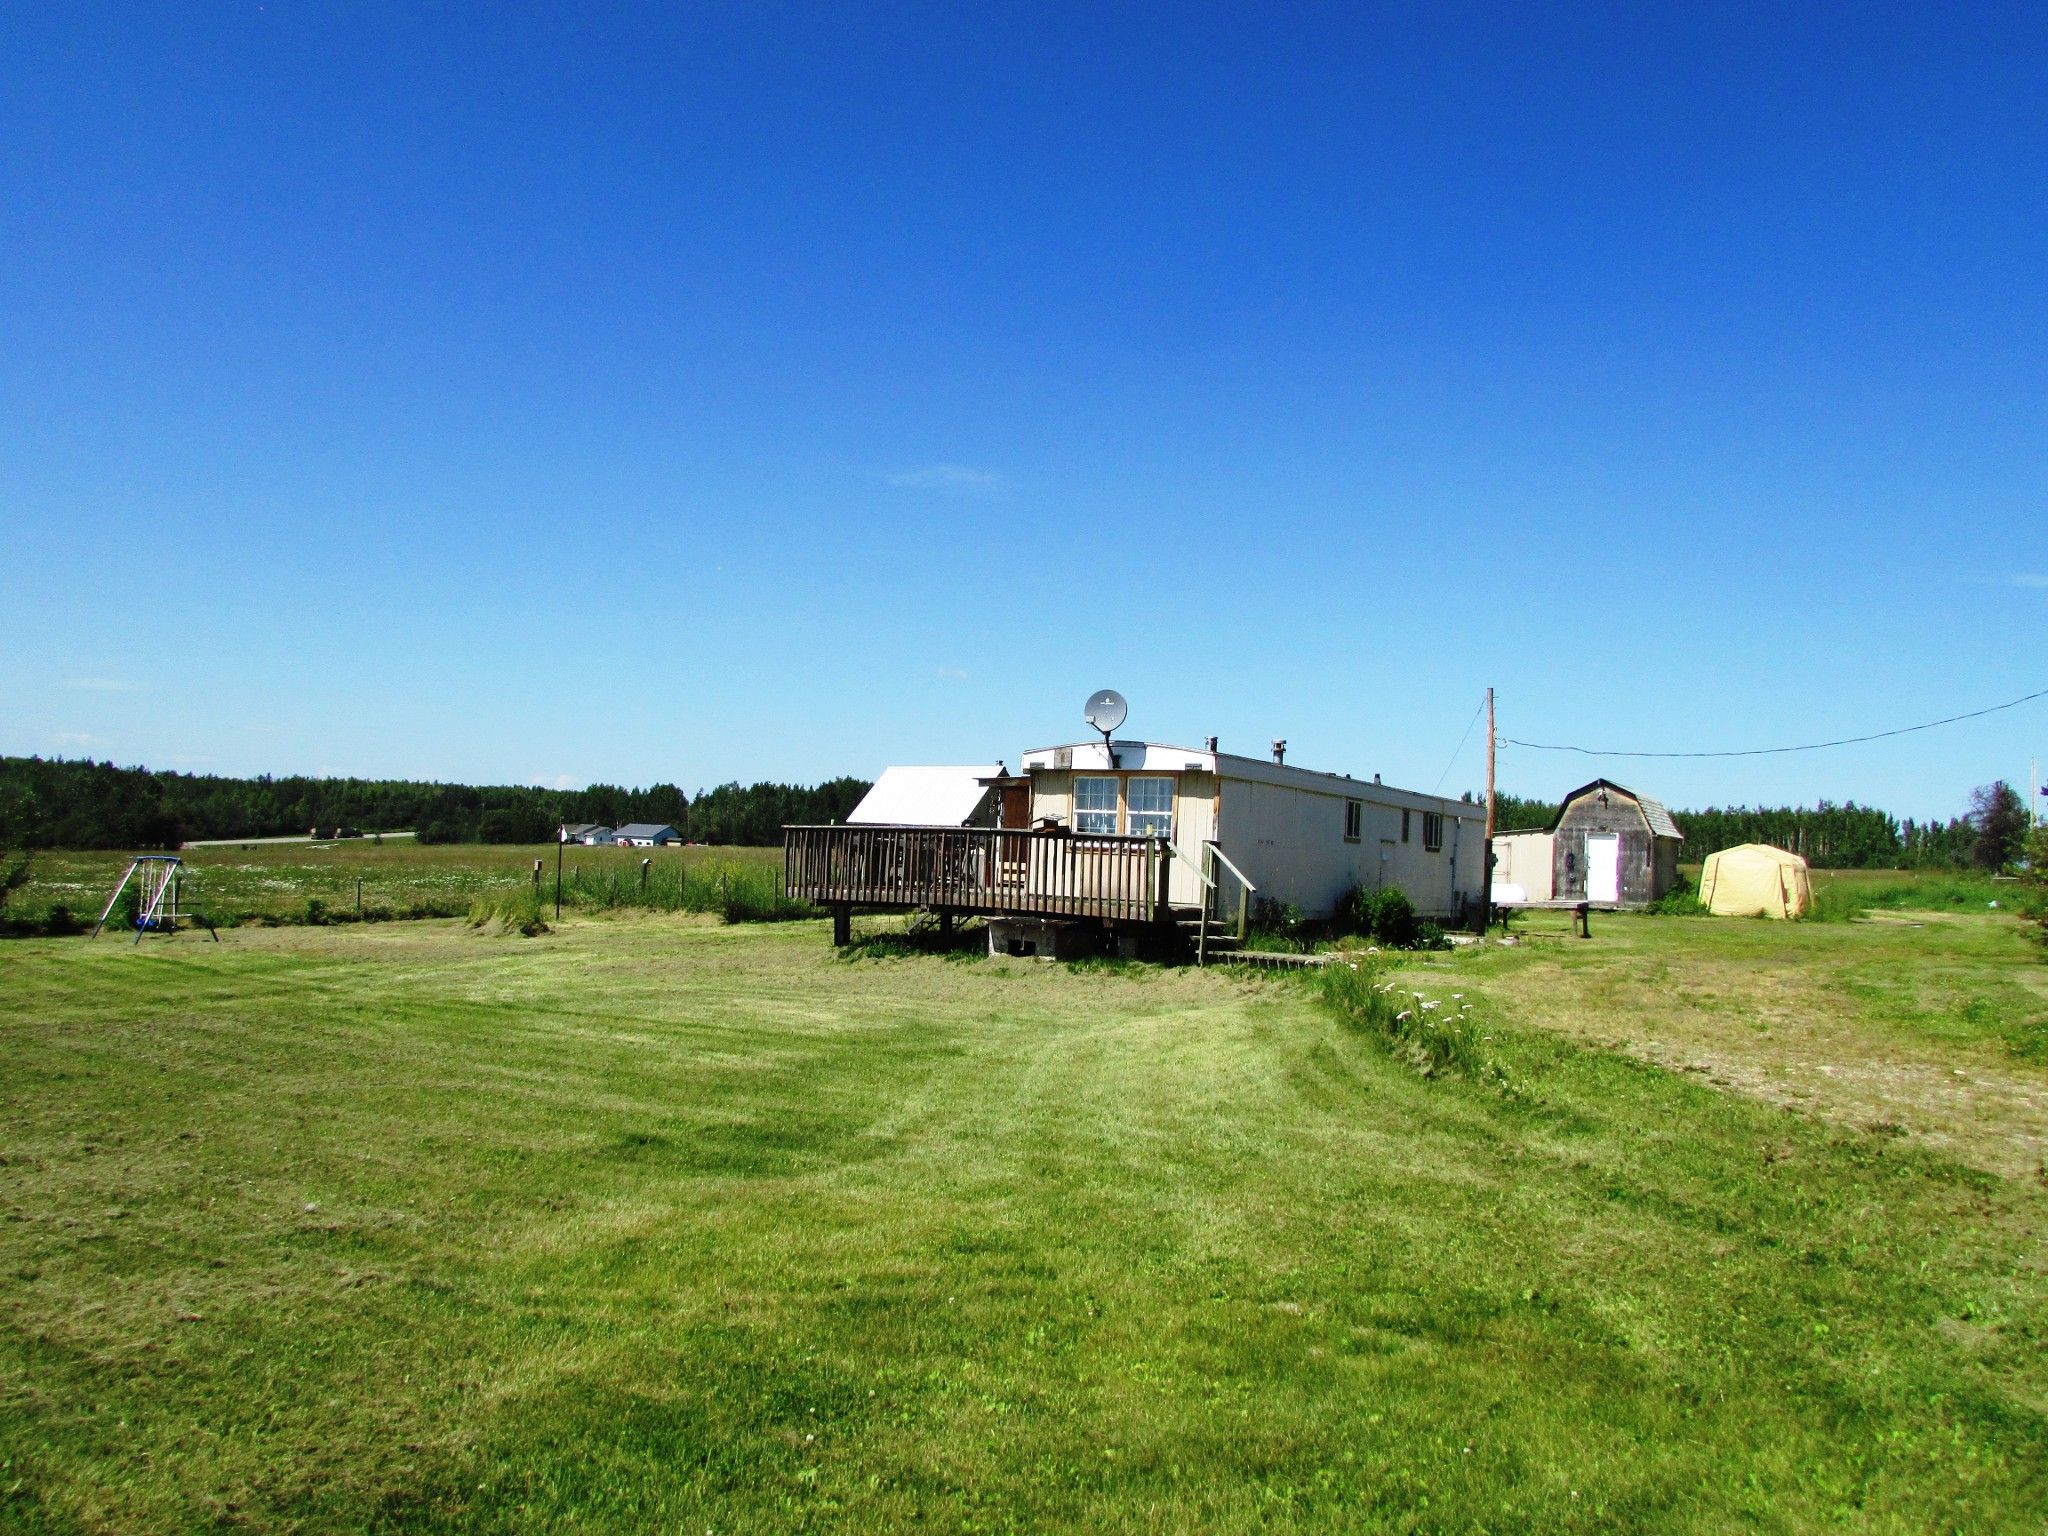 Main Photo: 3941 247 Road in Kiskatinaw: BCNREB Out of Area Manufactured Home for sale (Fort St. John (Zone 60))  : MLS®# R2327027